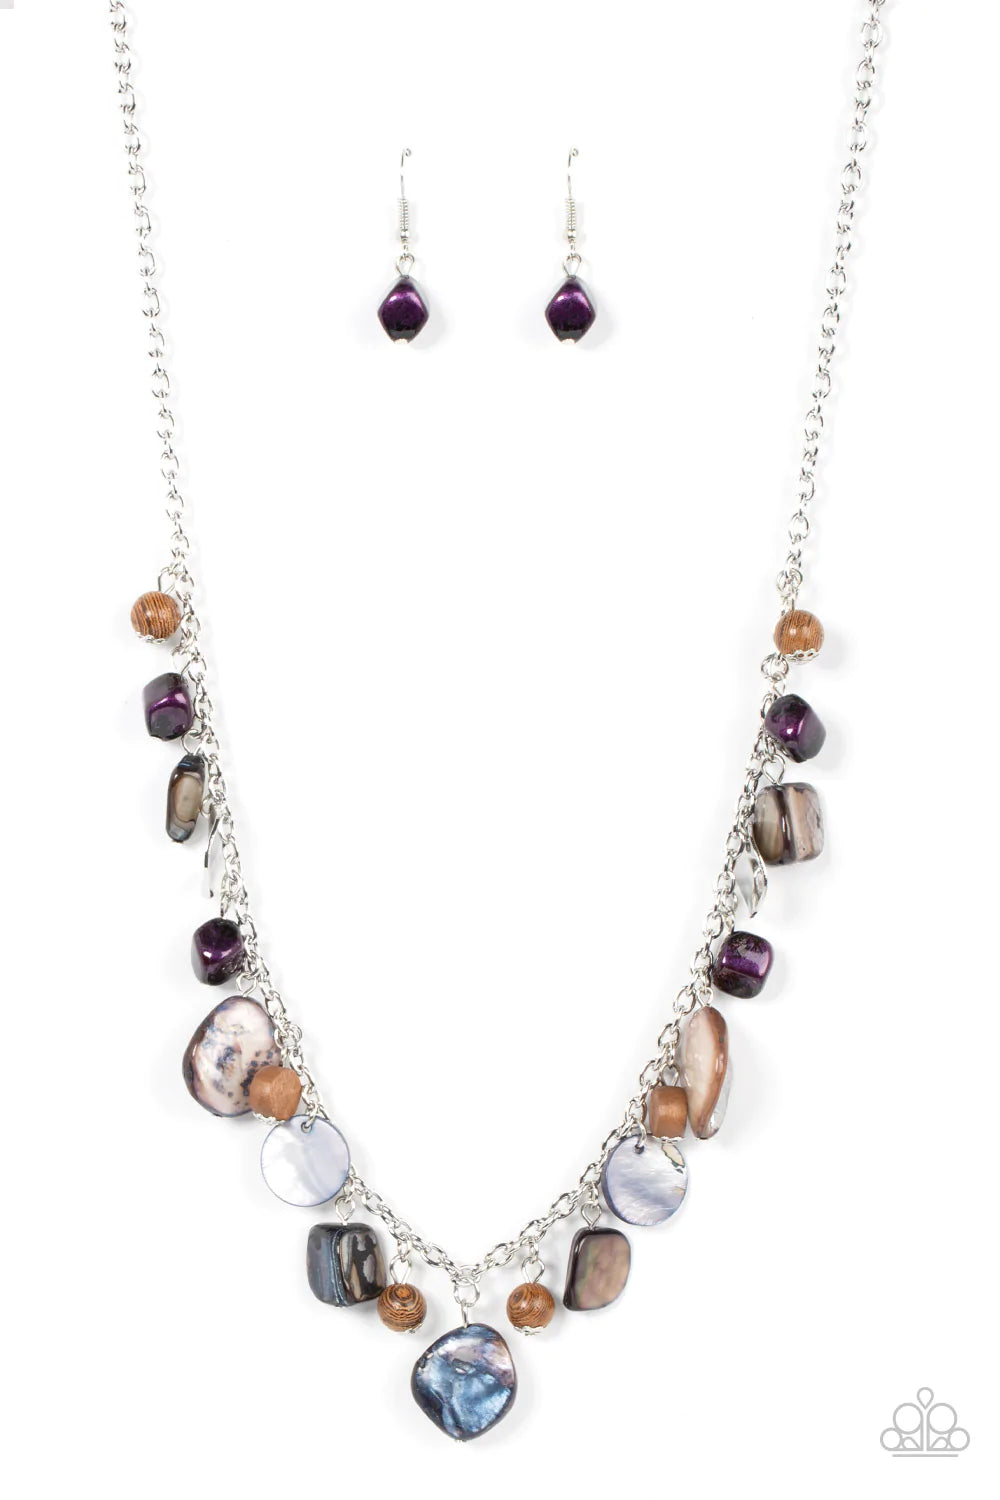 Paparazzi Accessories Caribbean Charisma - Purple A mismatched collection of warped silver discs, brown wooden beads, and iridescent shell-like rock accents dances from the bottom of a classic silver chain, creating a tropical sensation across the chest.